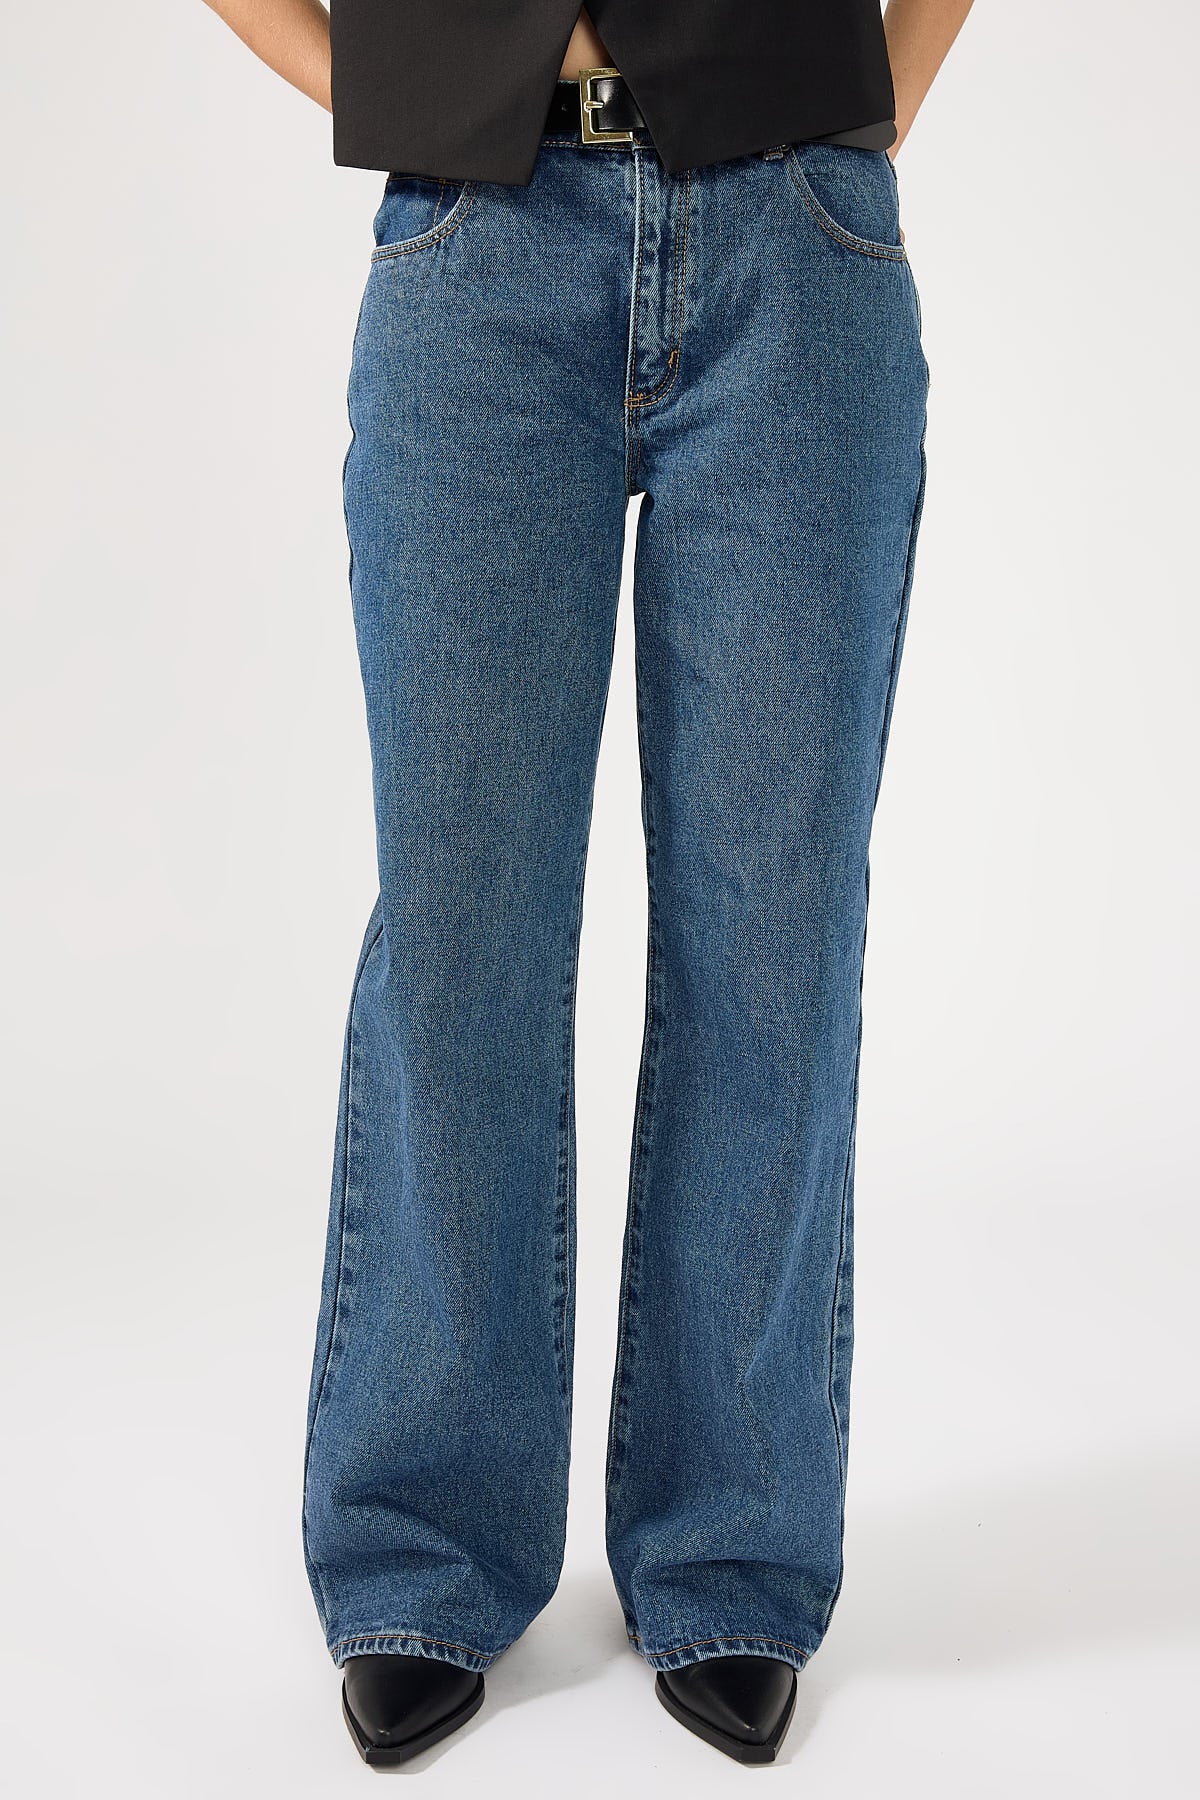 Abrand 95 Mid Rise Baggy Jean Bella